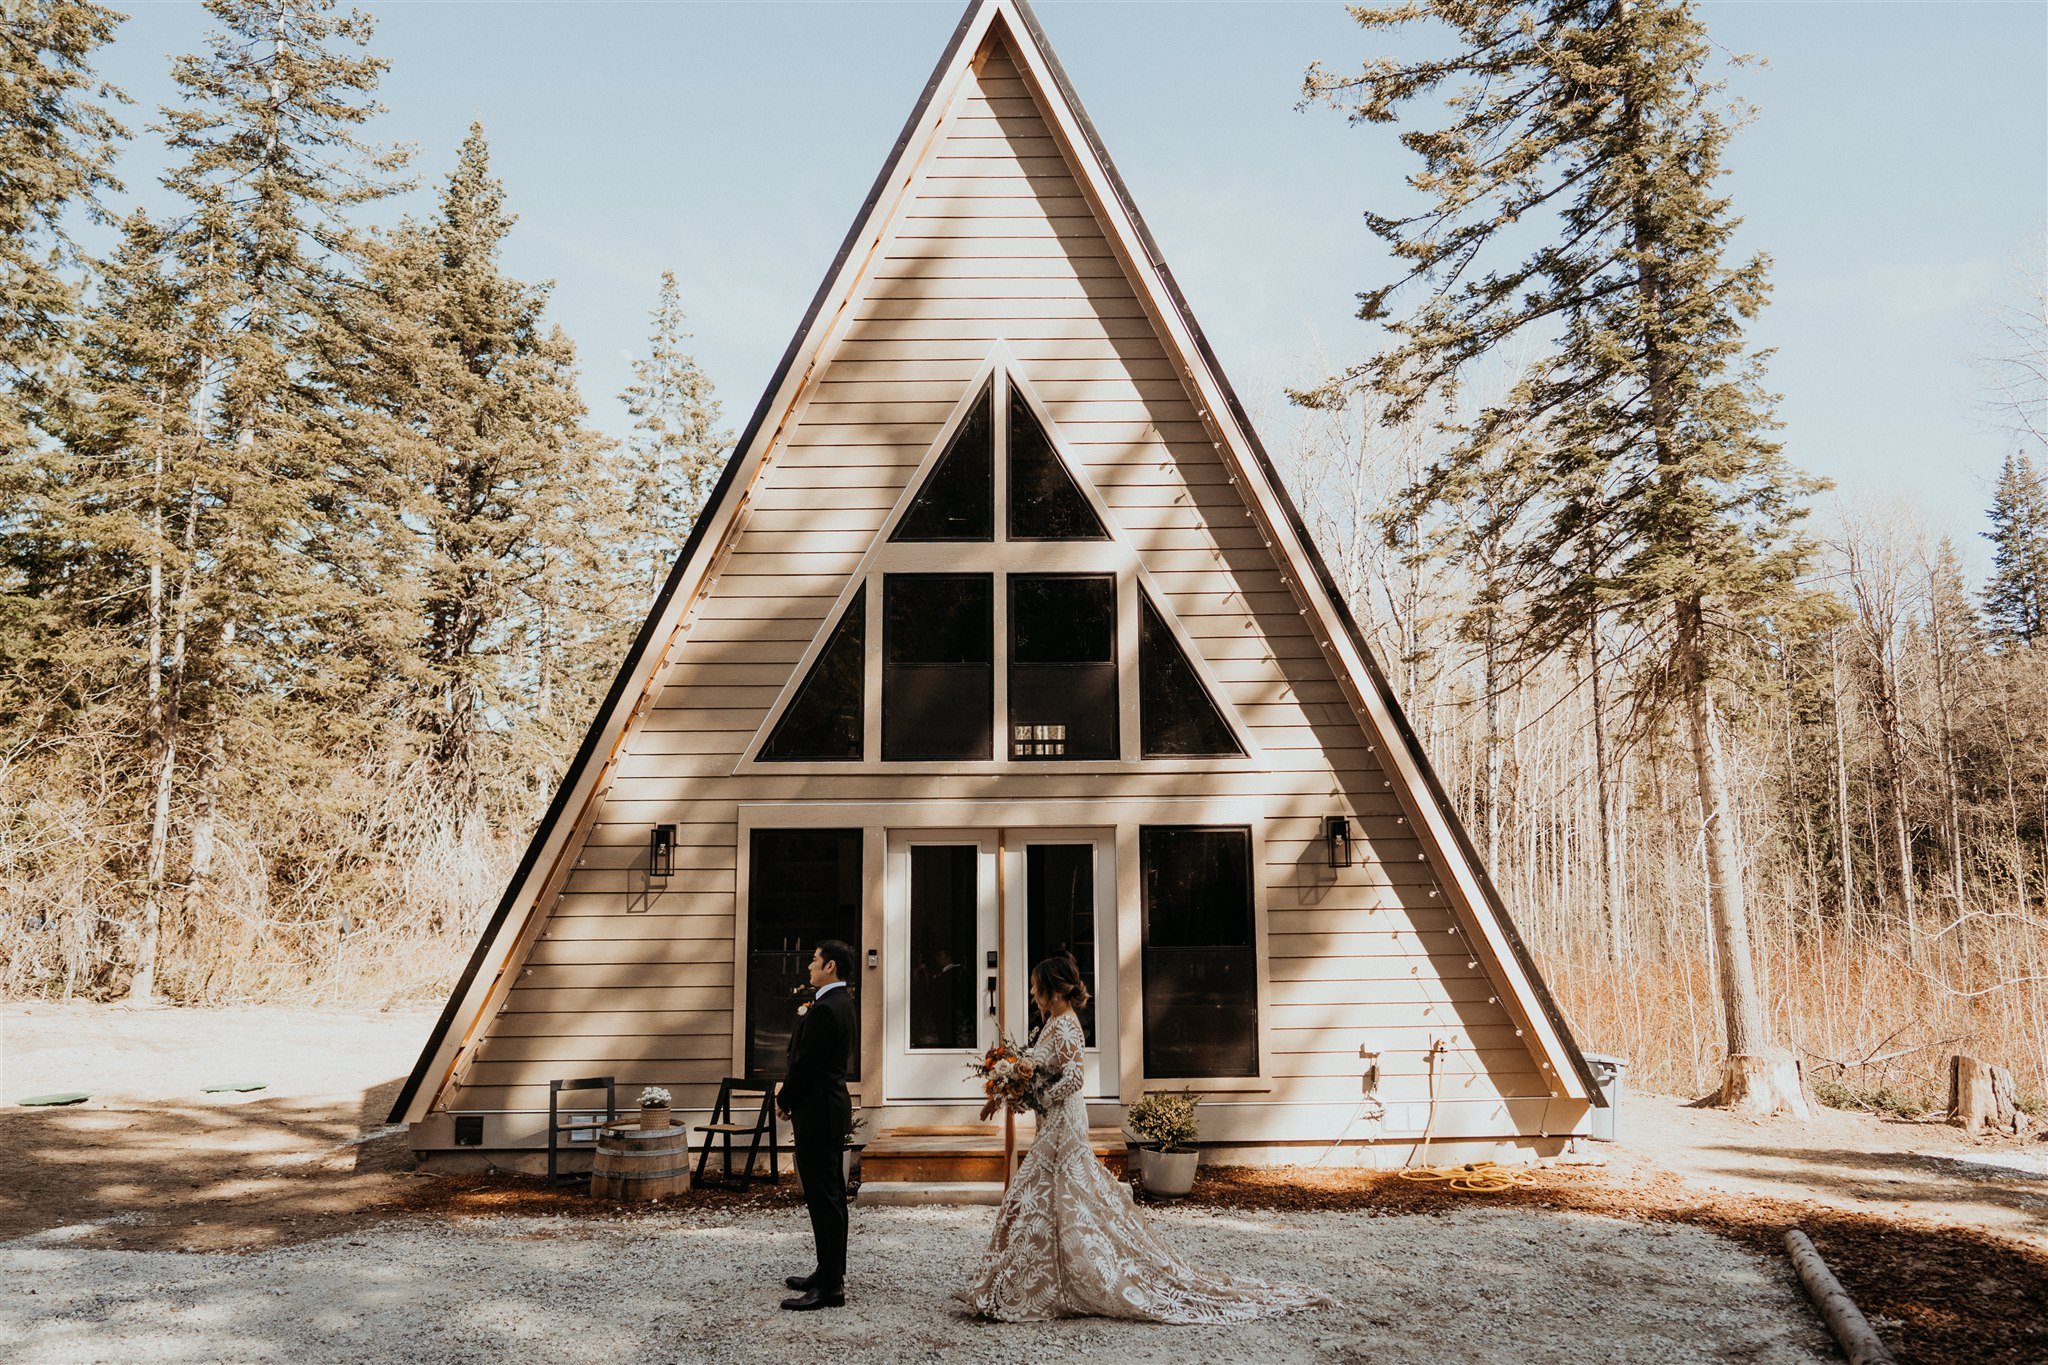 Bride and groom first look in front of A-Frame cabin